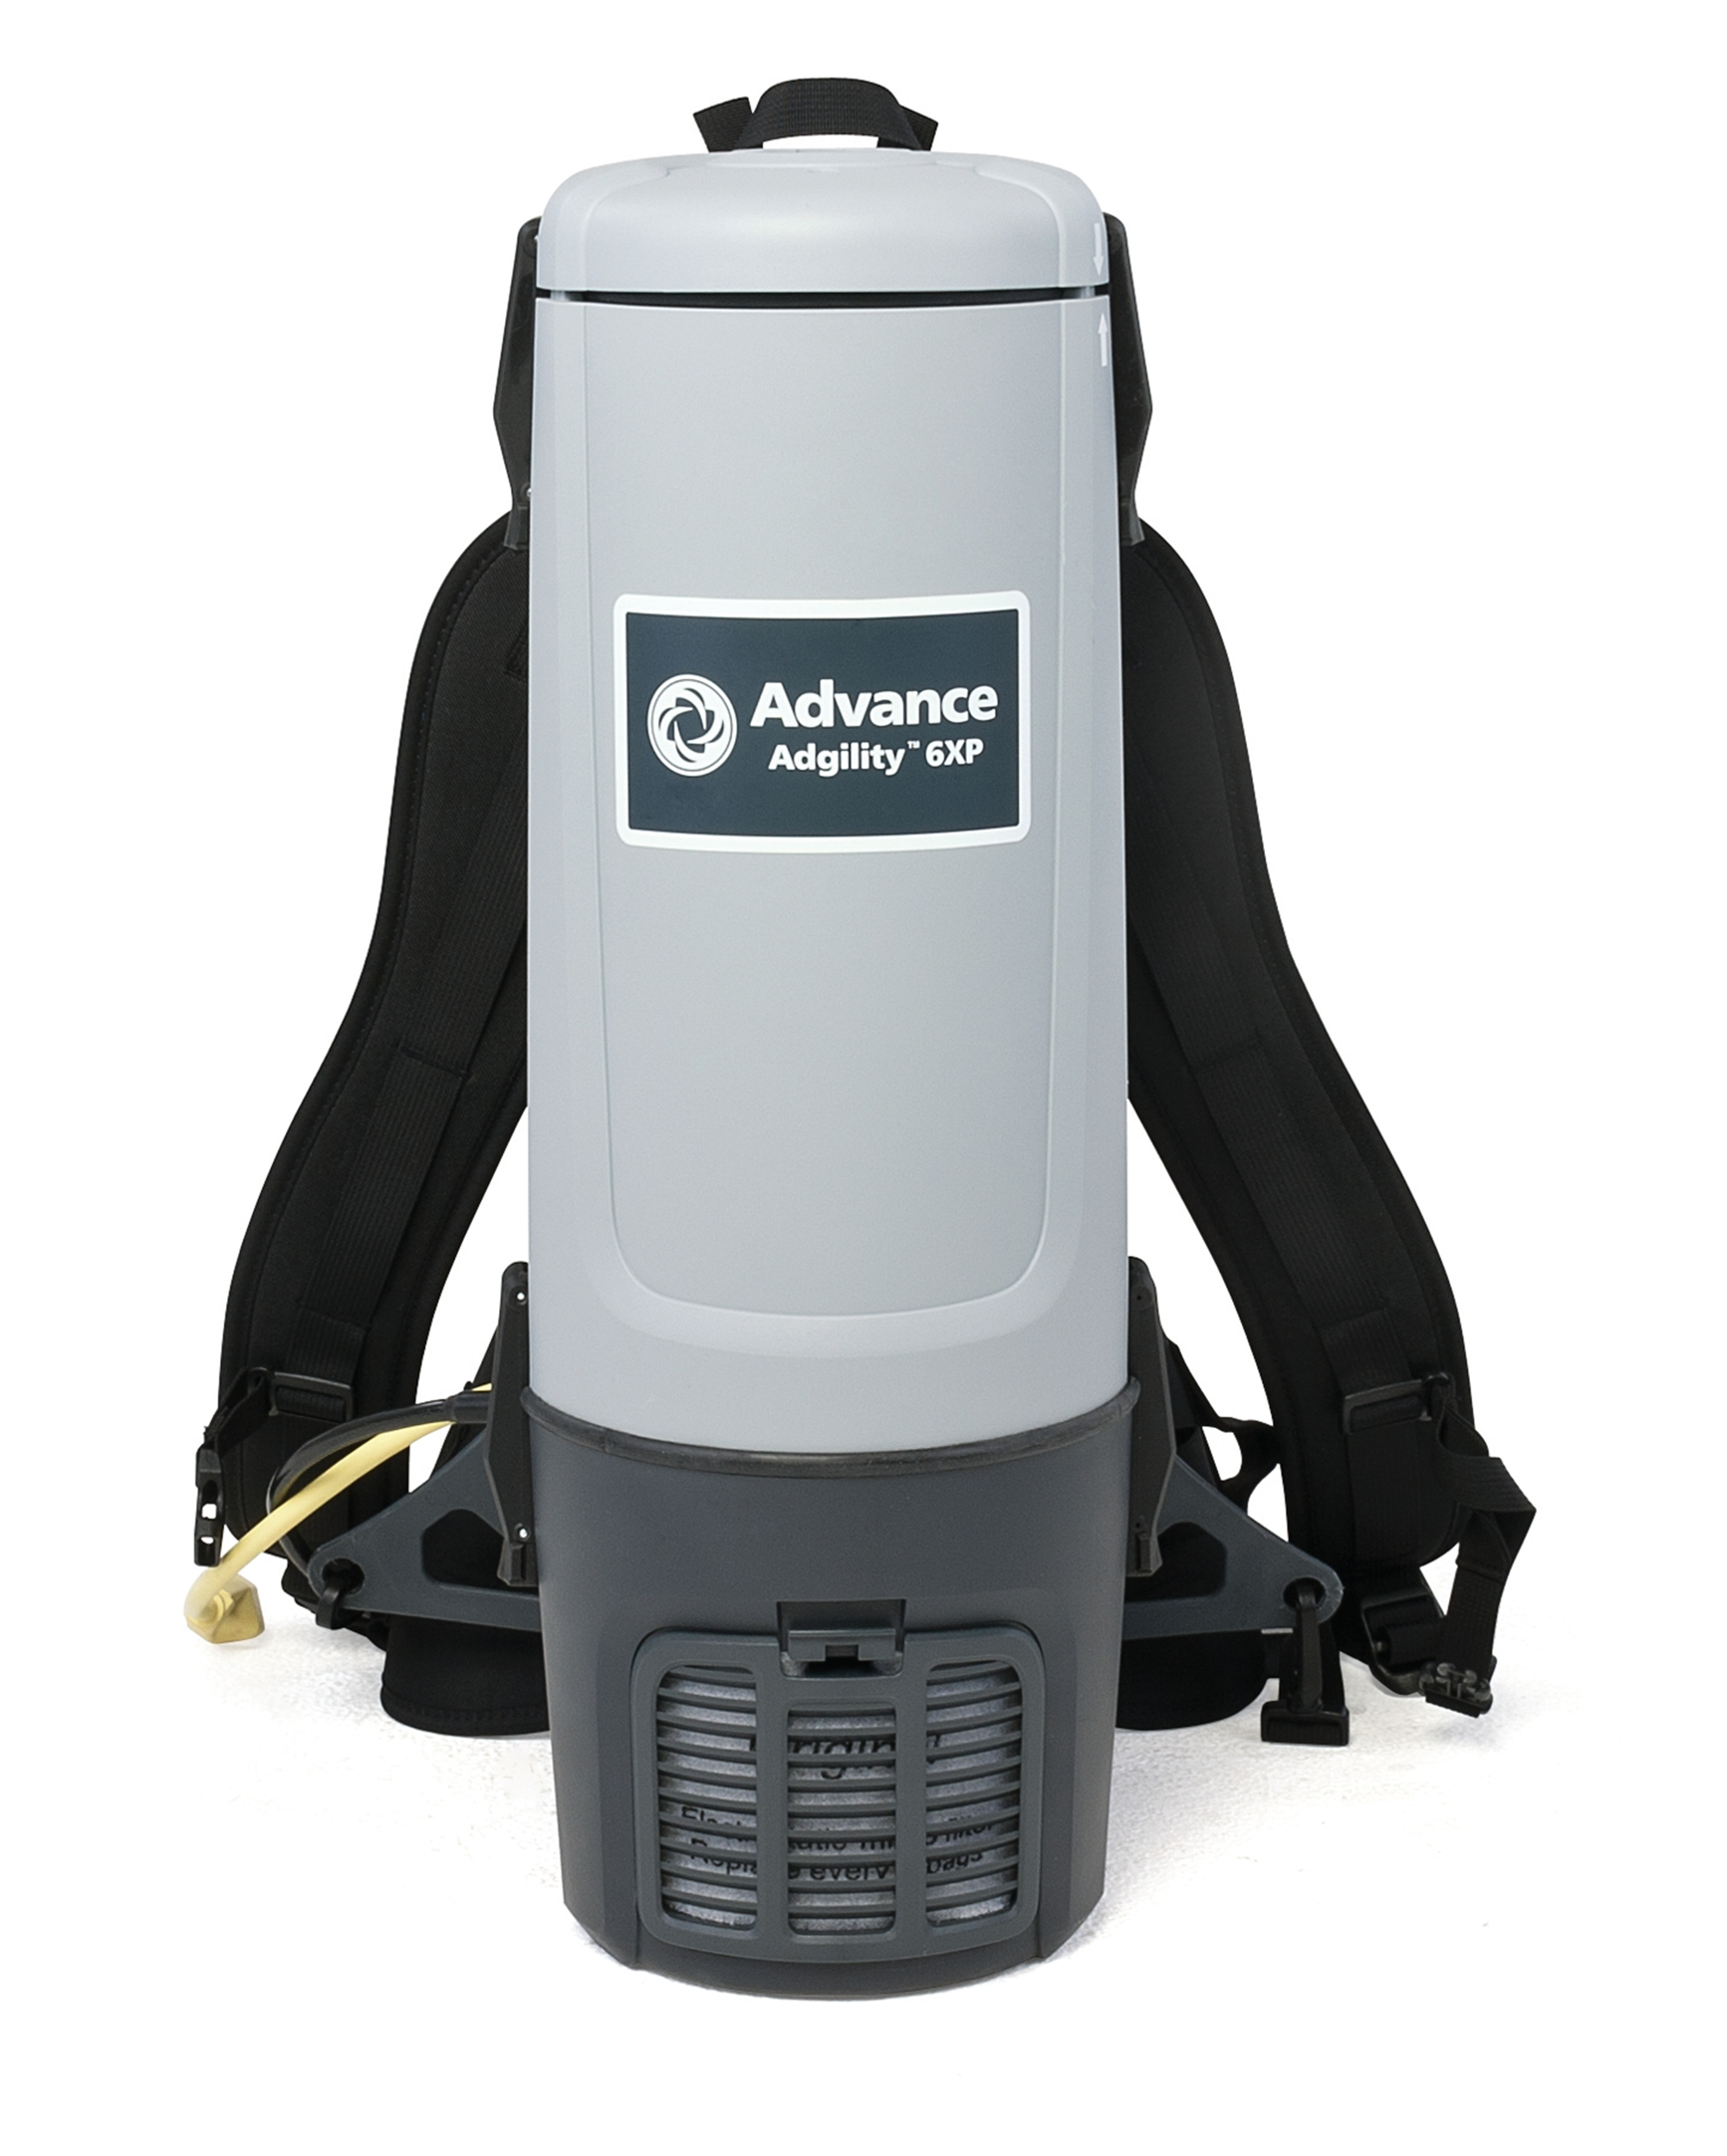 Advance Adgility 6 XP Backpack vacuum Advance, Adgility, 6, XP, Backpack, vacuum, karcher, BV, 7/1, HEPA, quiet, lightweight, windsor, commercial, harness, janitorial, professional, industrial, 